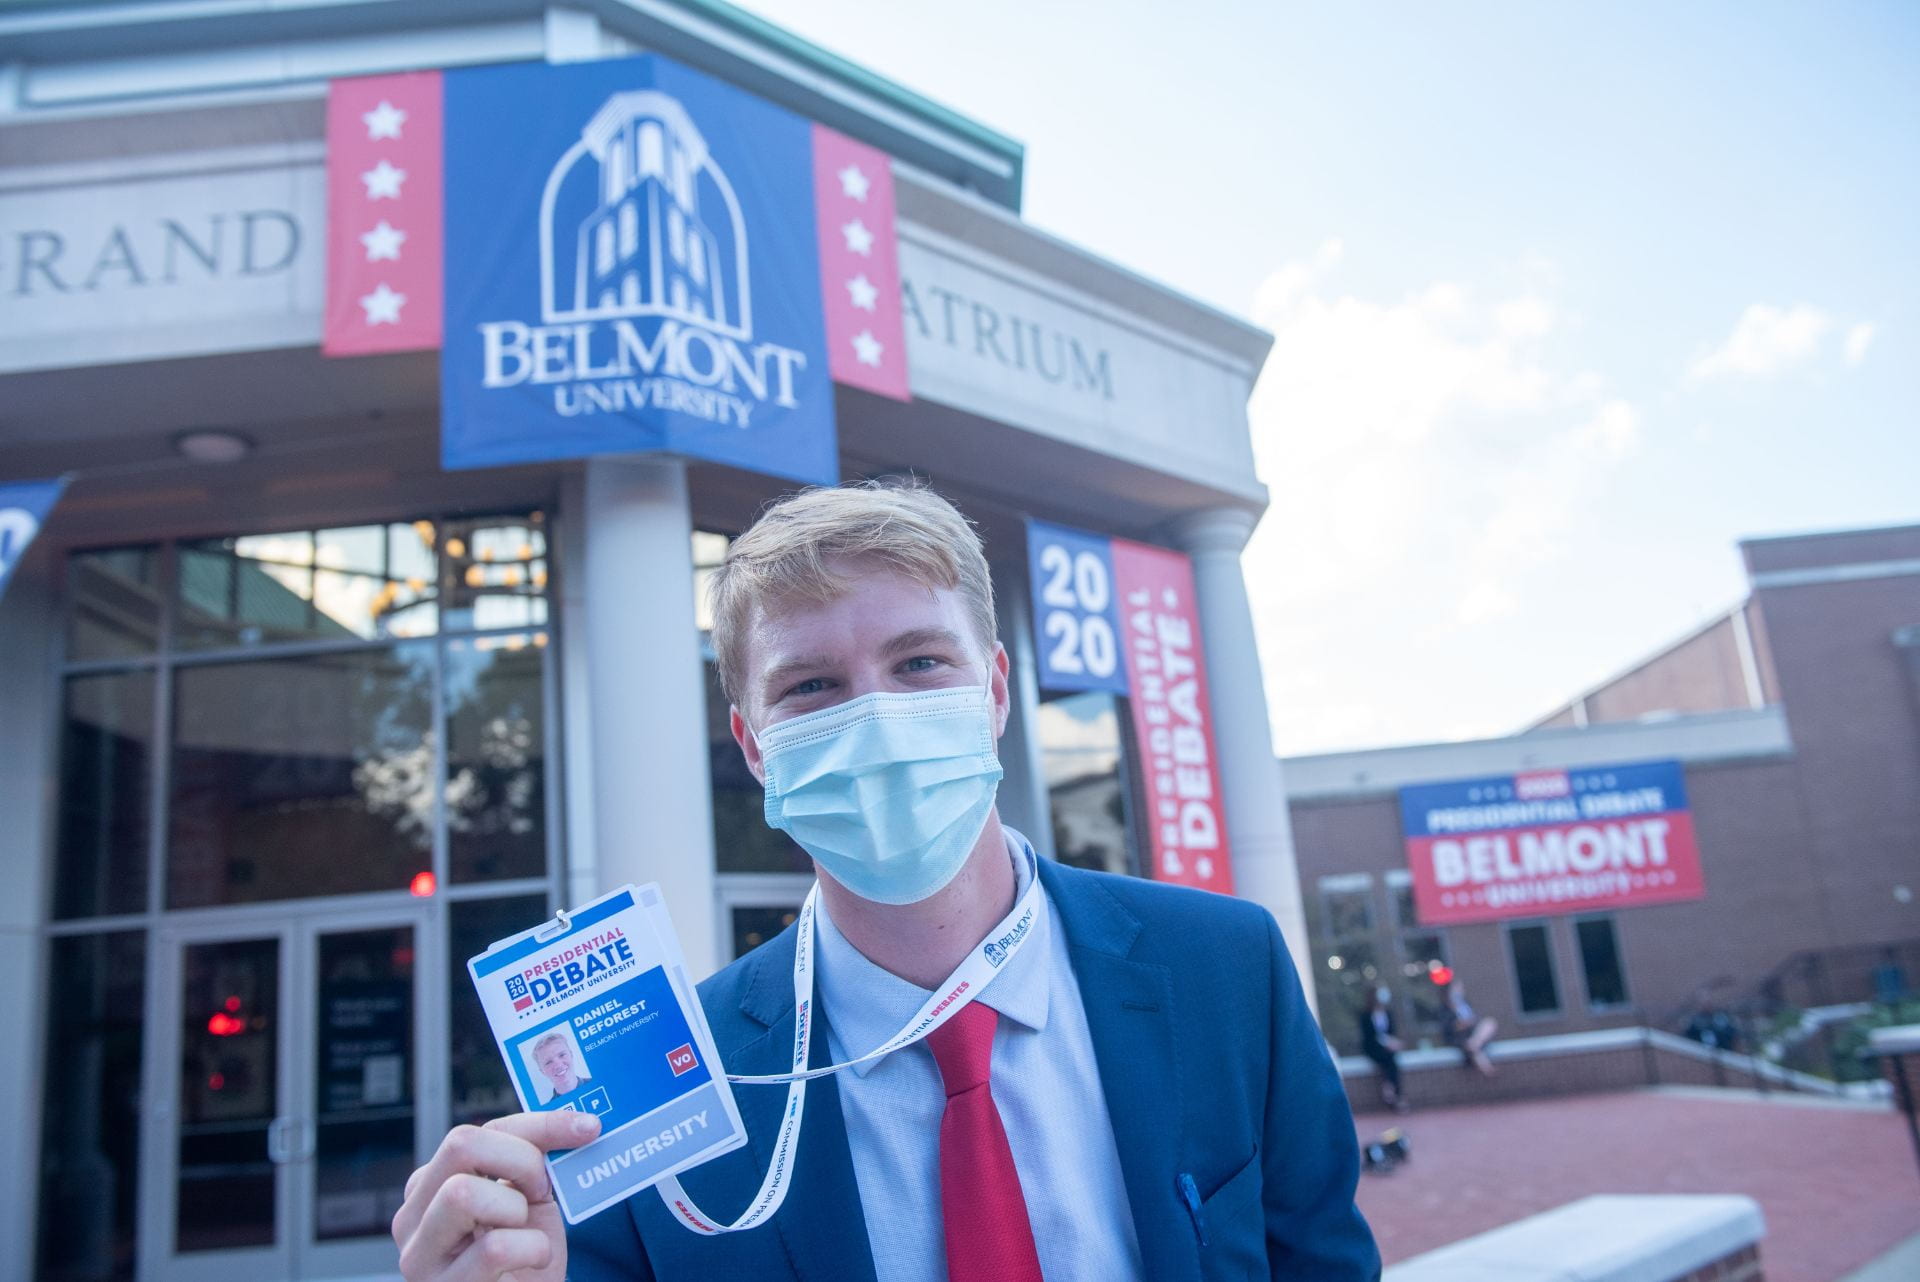 Belmont student Daniel (Danny) Deforest shows off is pass in front of Debate Hall